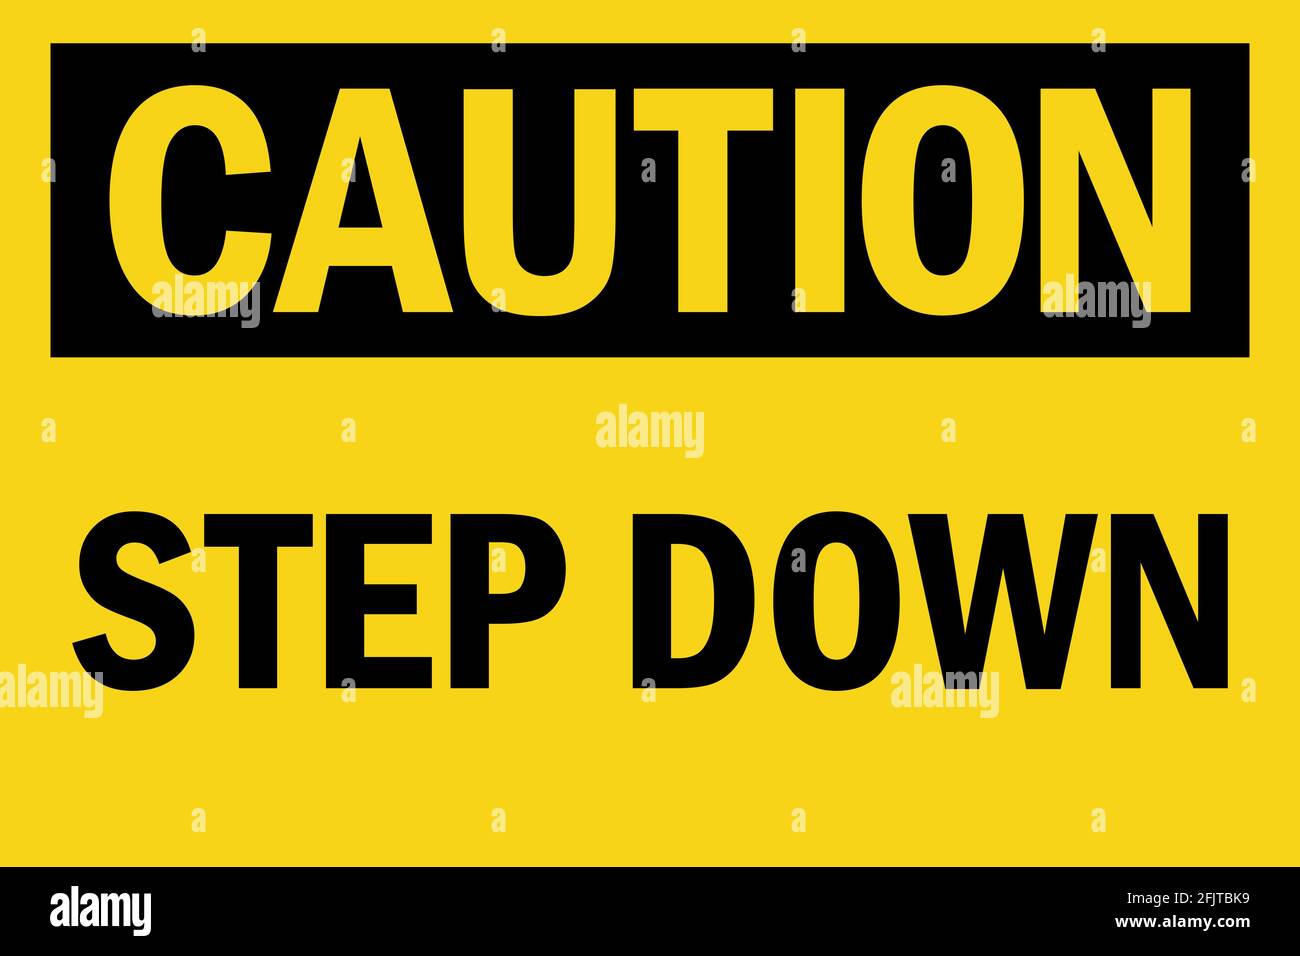 Step down caution sign. Black on yellow background. Safety signs and symbols. Stock Vector